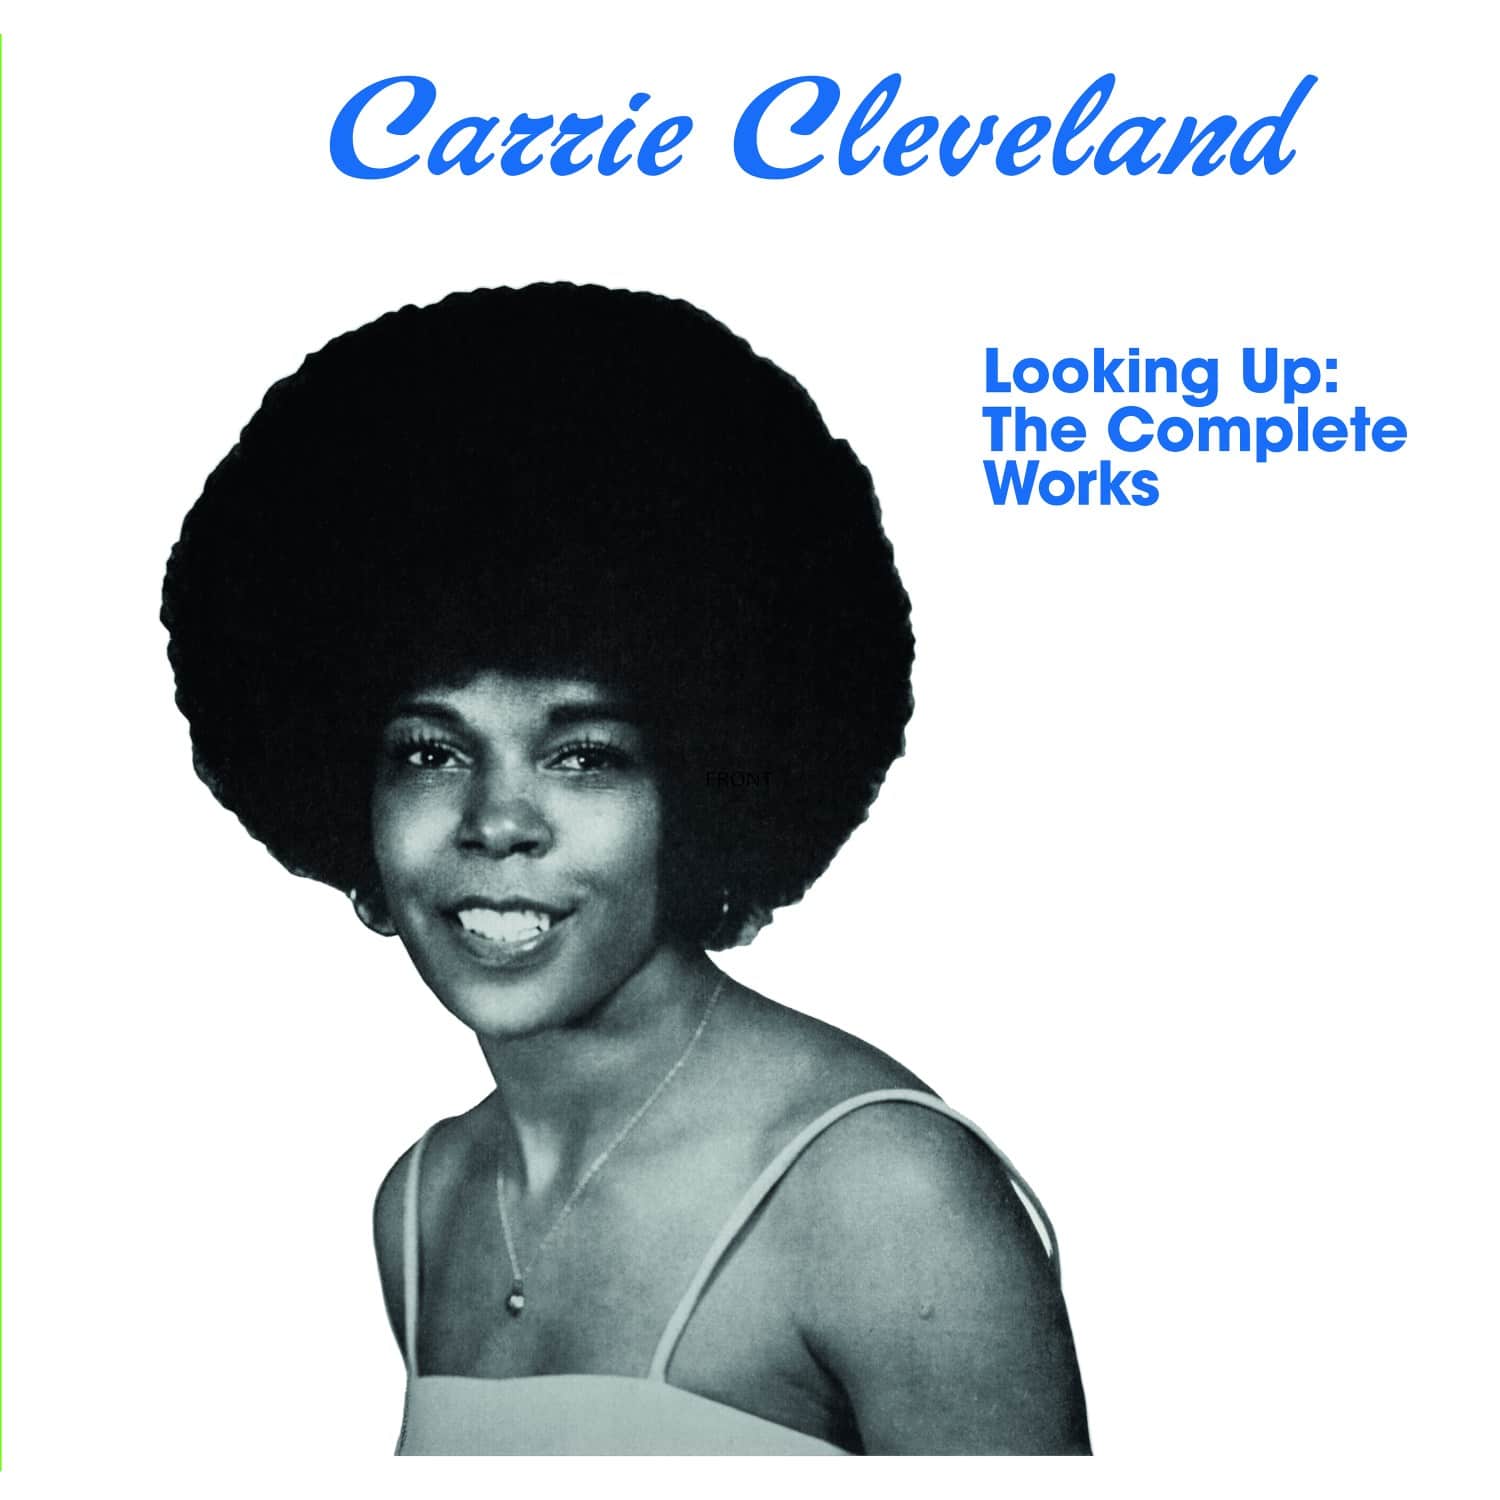 Carrie Cleveland - Looking Up: The Complete Works ( Lp+7") - KALITALP002 - Kalita